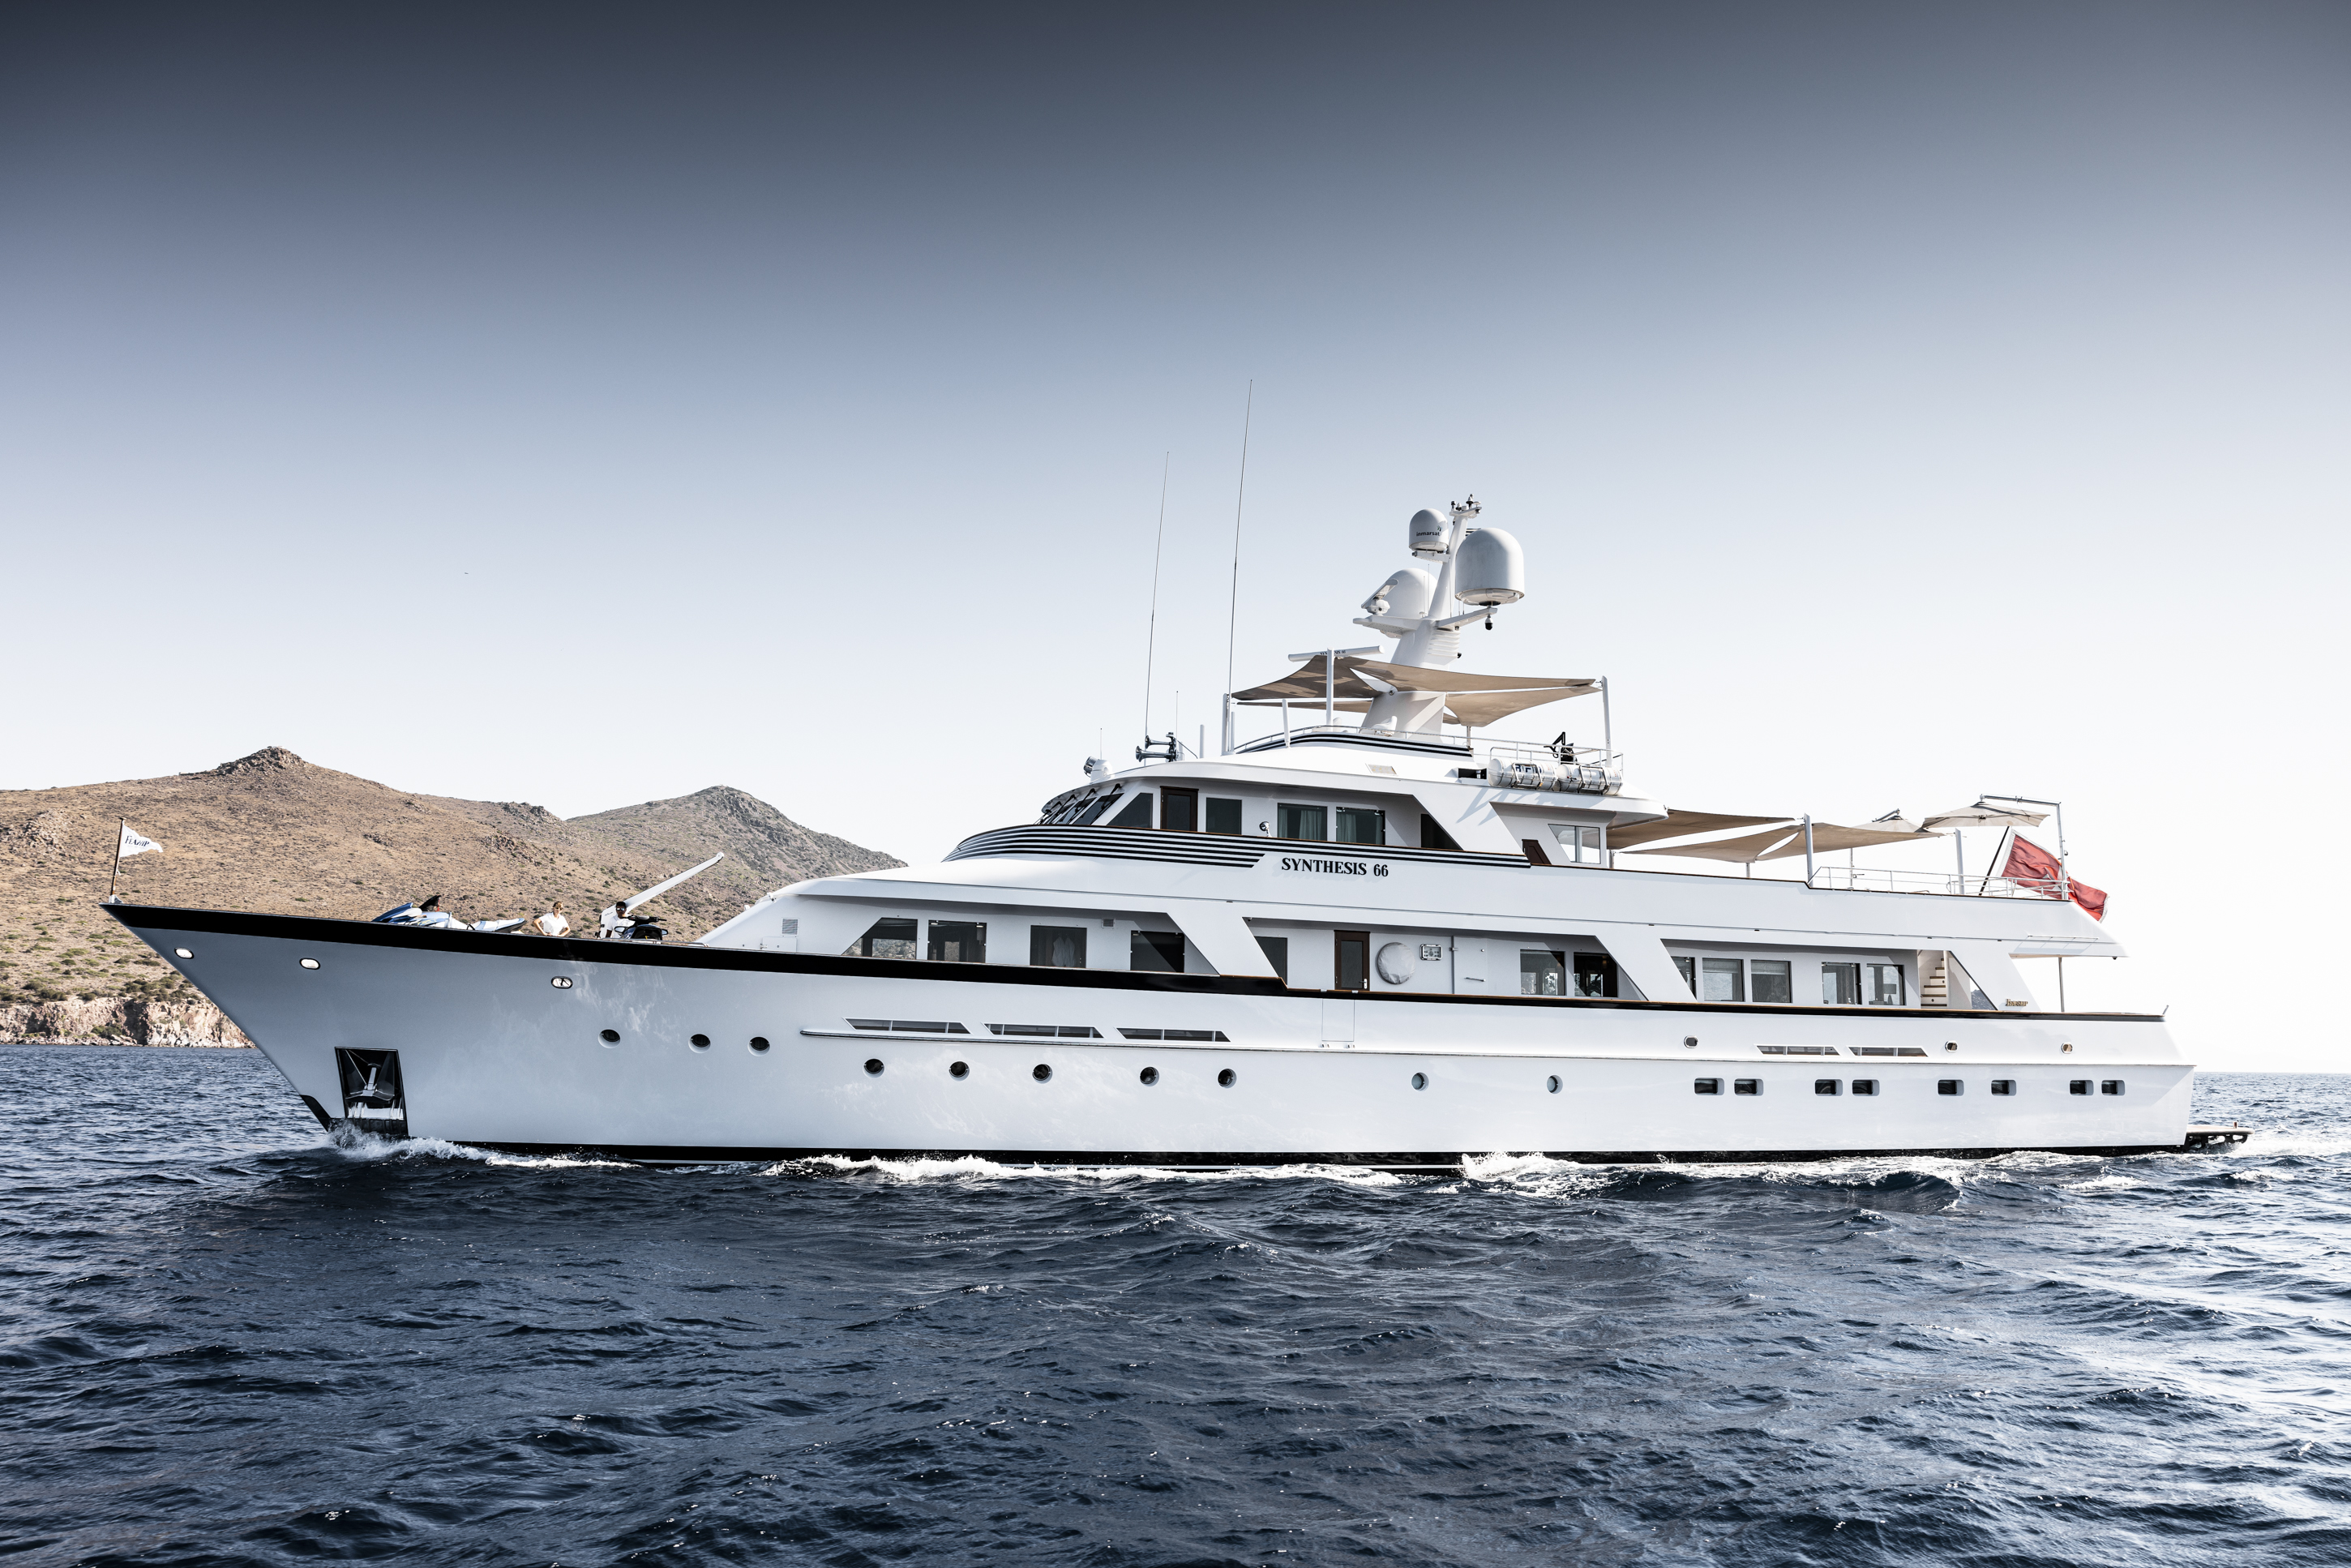 Super yacht SYNTHESIS 66